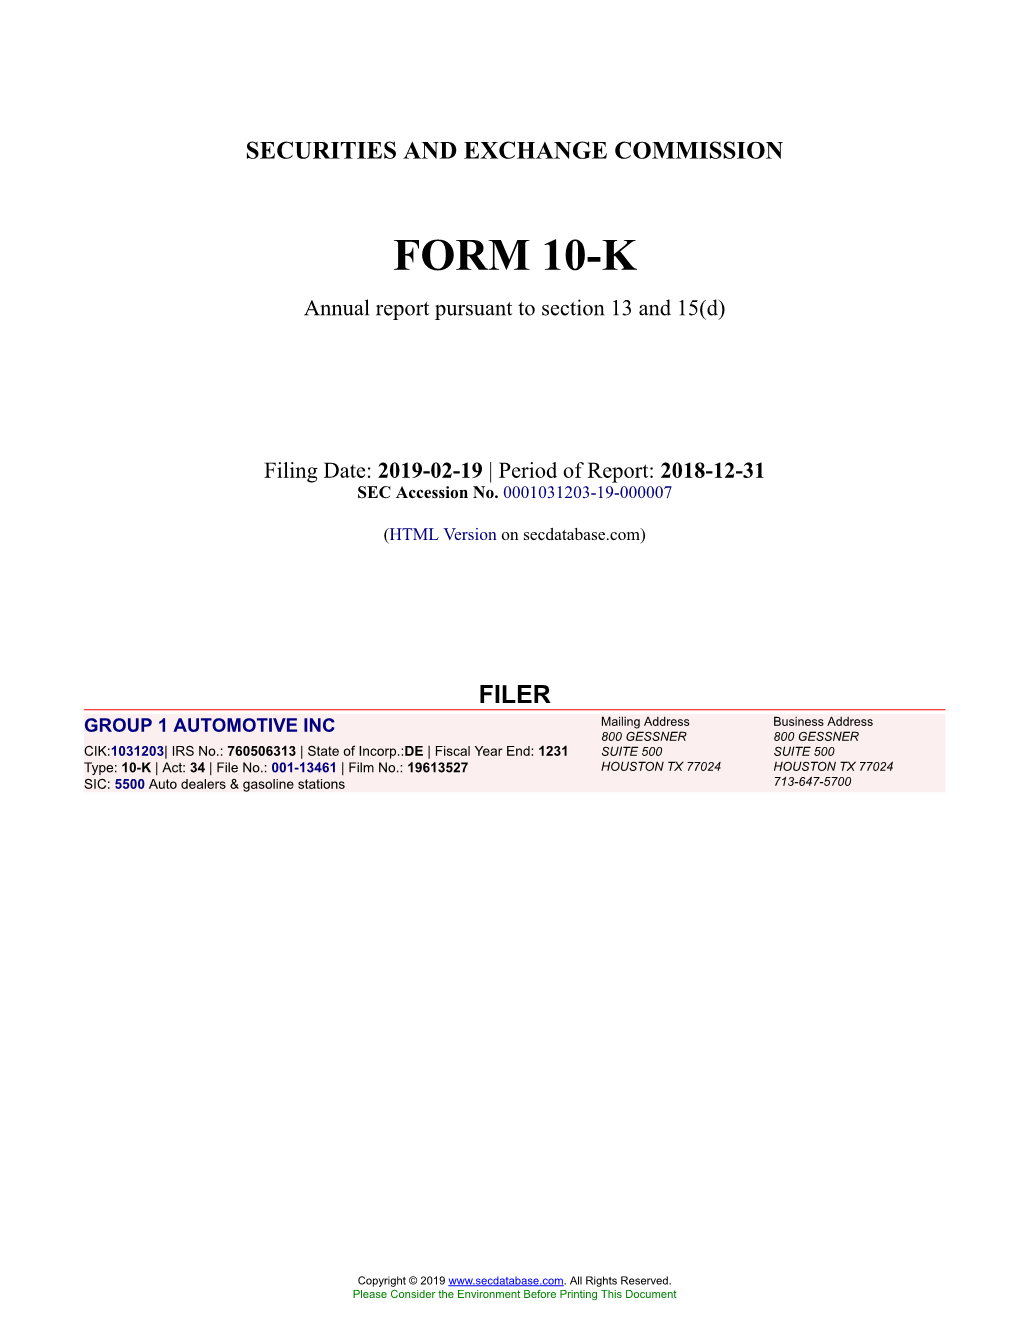 GROUP 1 AUTOMOTIVE INC Form 10-K Annual Report Filed 2019-02-19